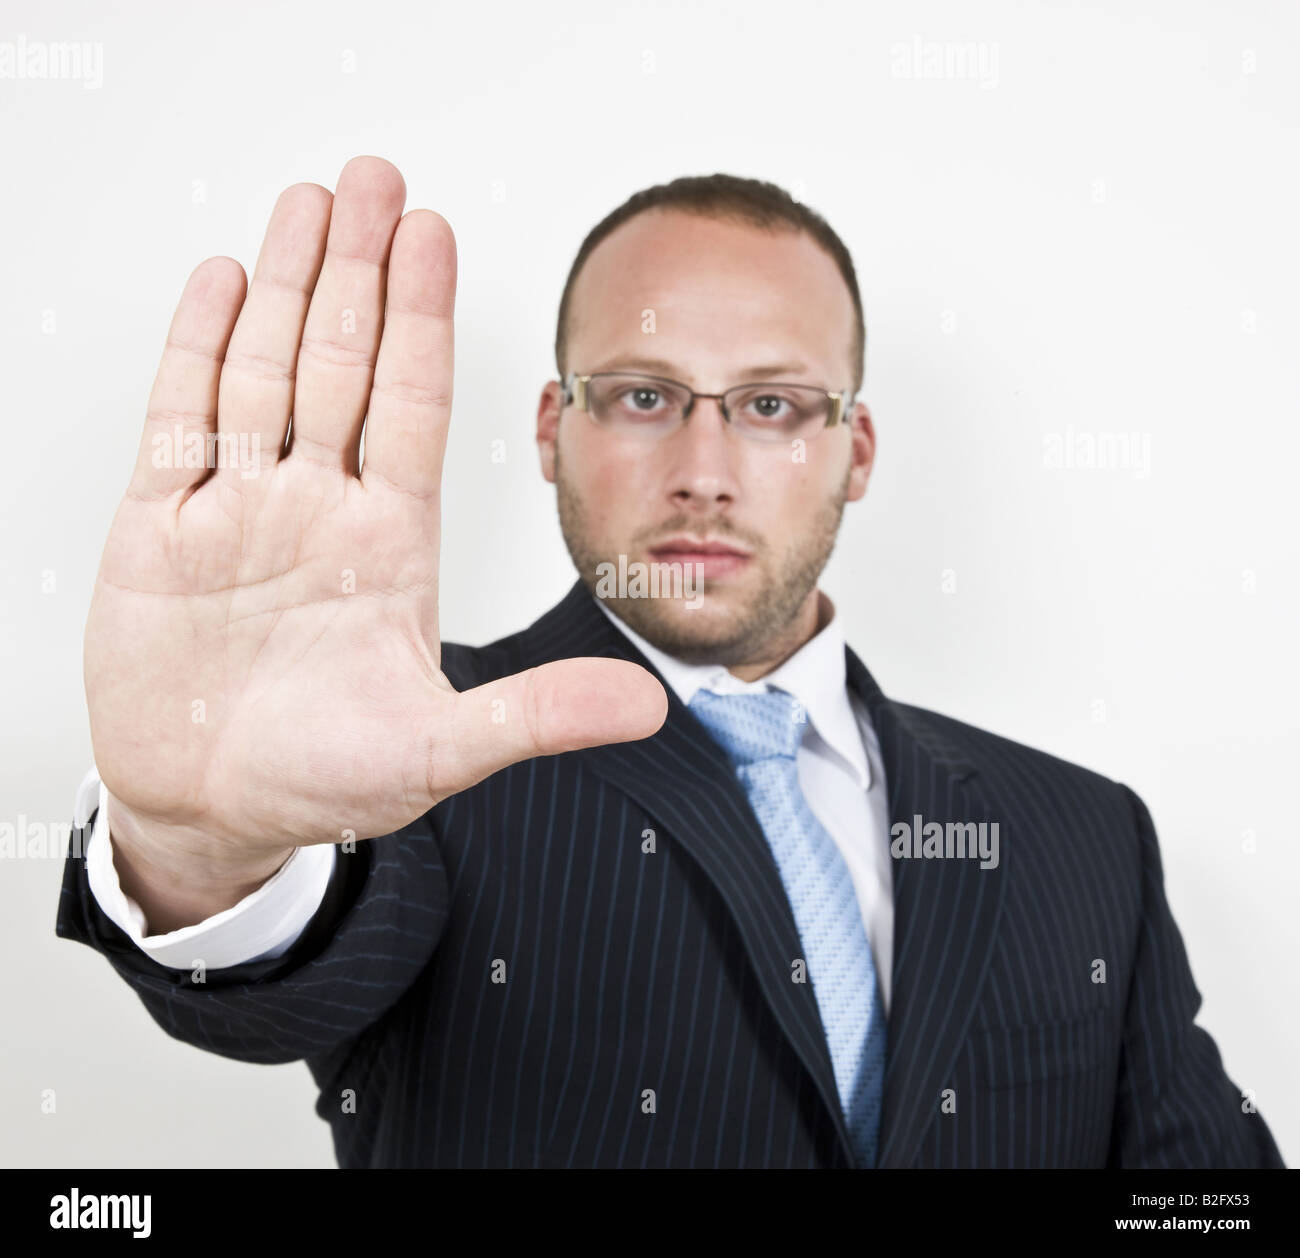 warning businessman holding his right hand up in a stop warning sign Stock Photo